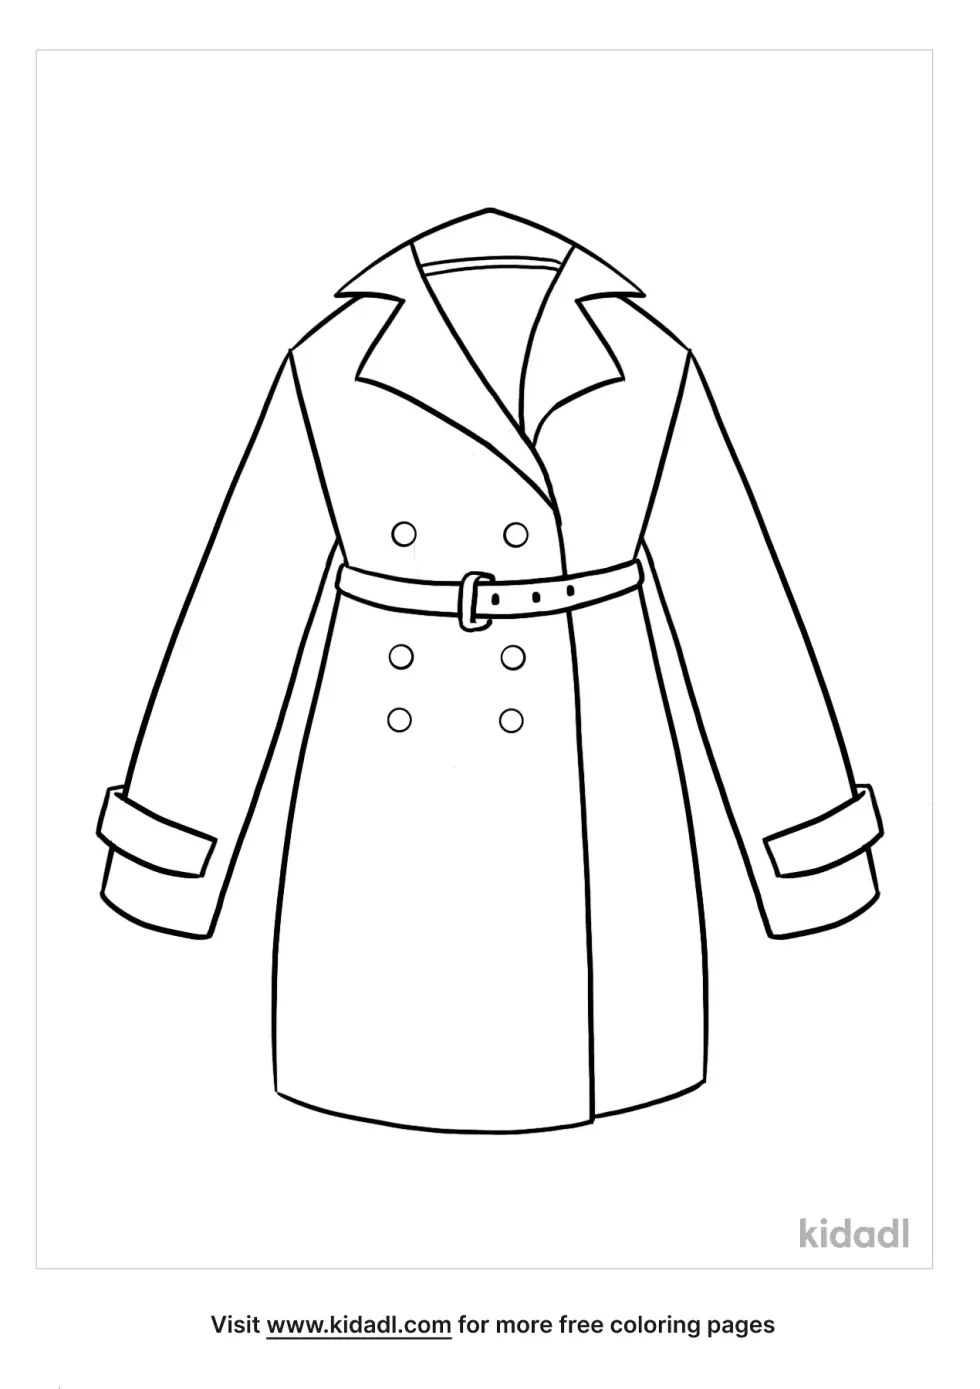 Coat Coloring Page